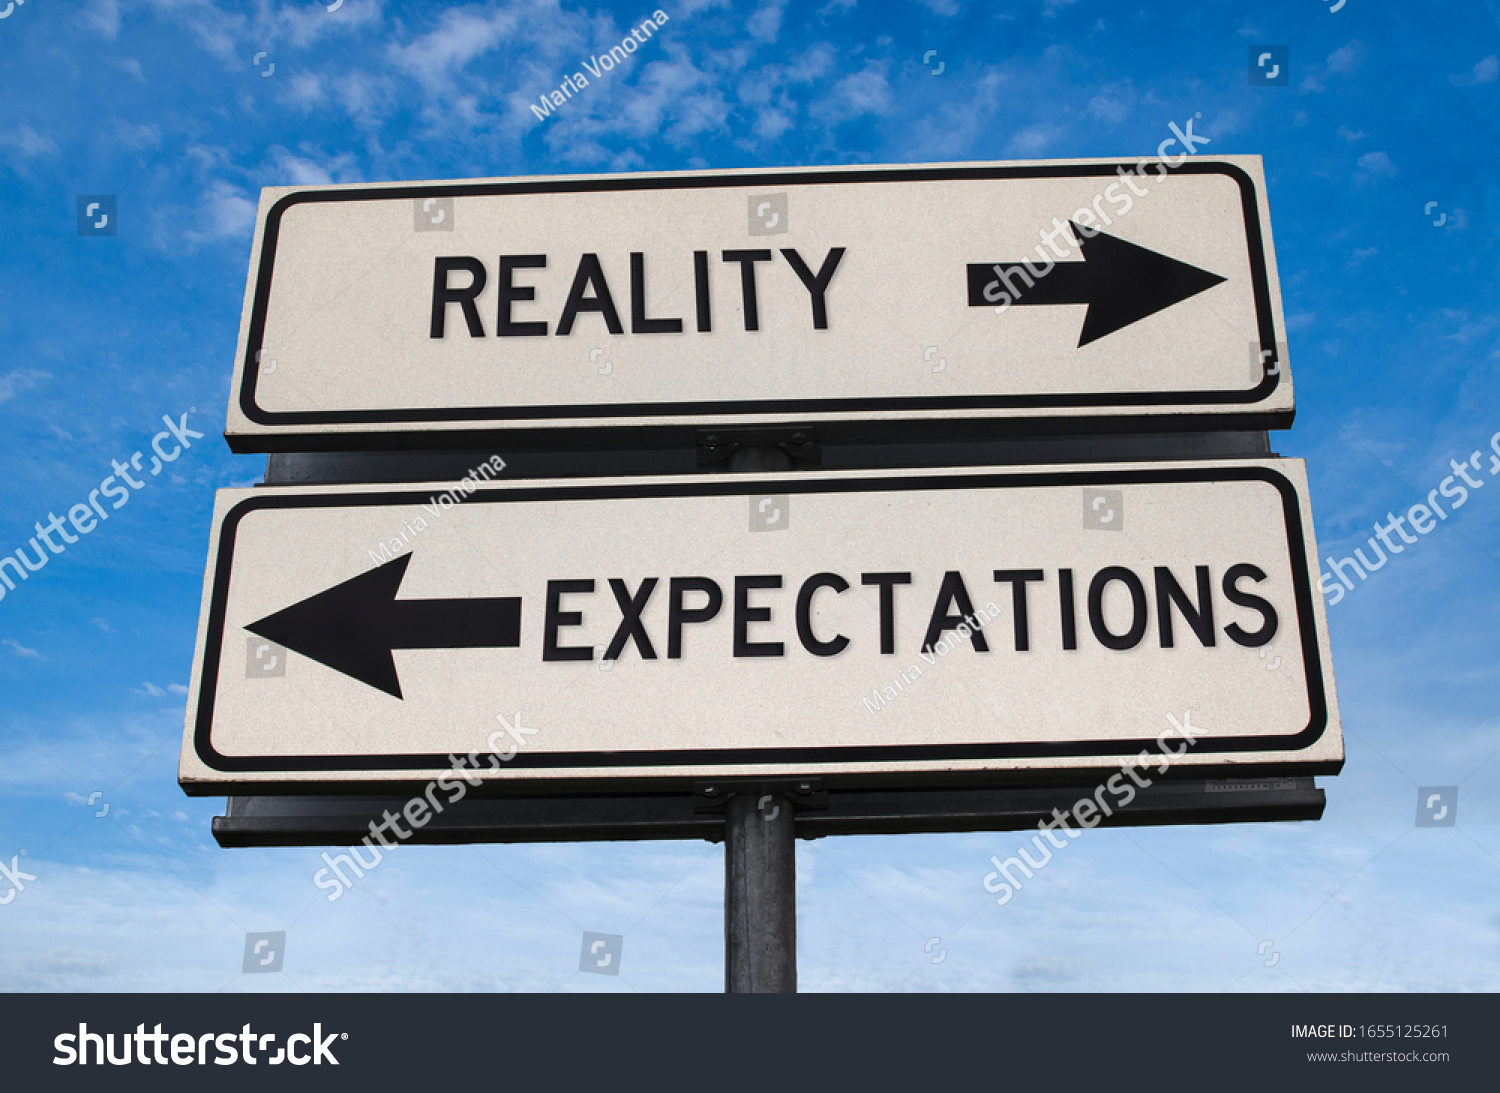 Reality vs expectation. White two street signs with arrow on metal pole with word. Directional road. Crossroads Road Sign, Two Arrow. Blue sky background. Two way road sign with text. #1655125261